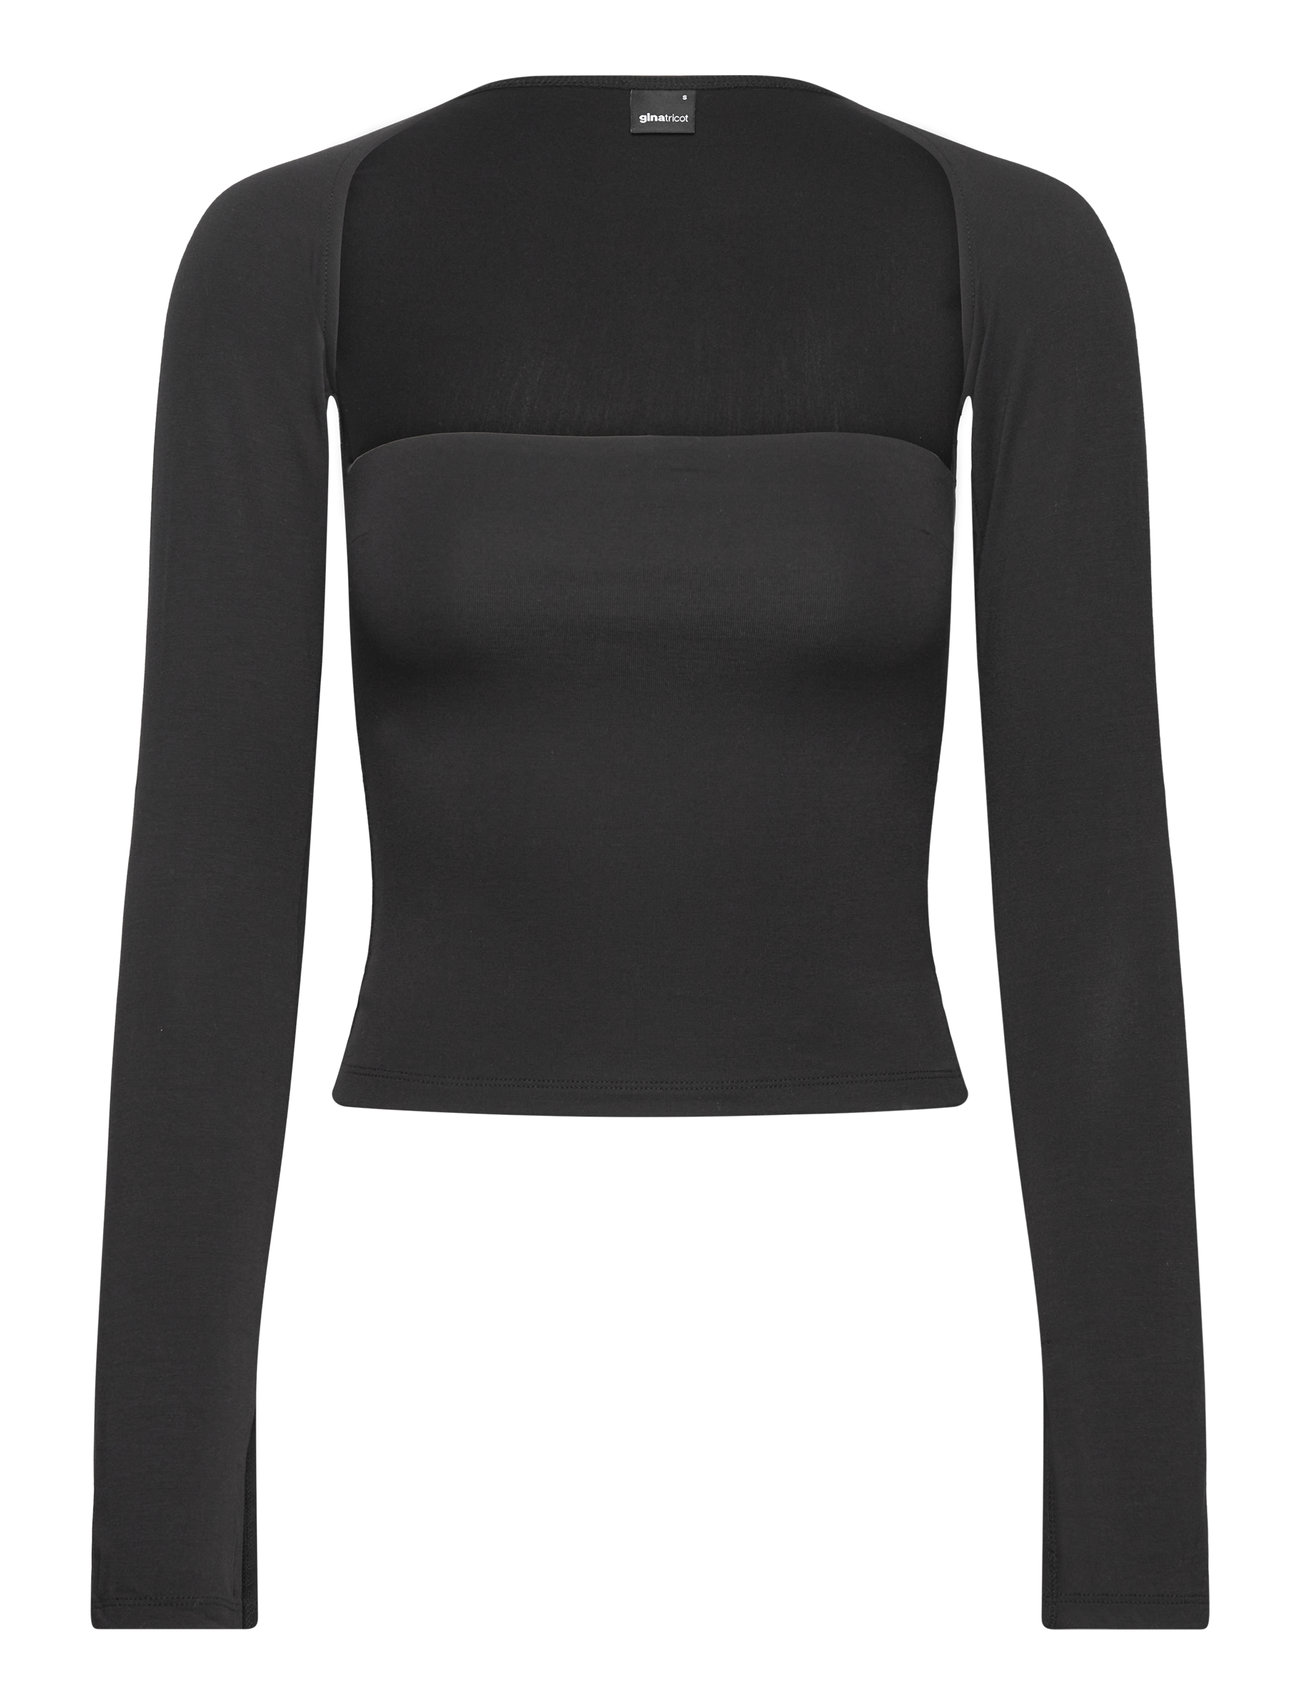 Soft Touch Square Neck Top Tops T-shirts & Tops Long-sleeved Black Gina Tricot